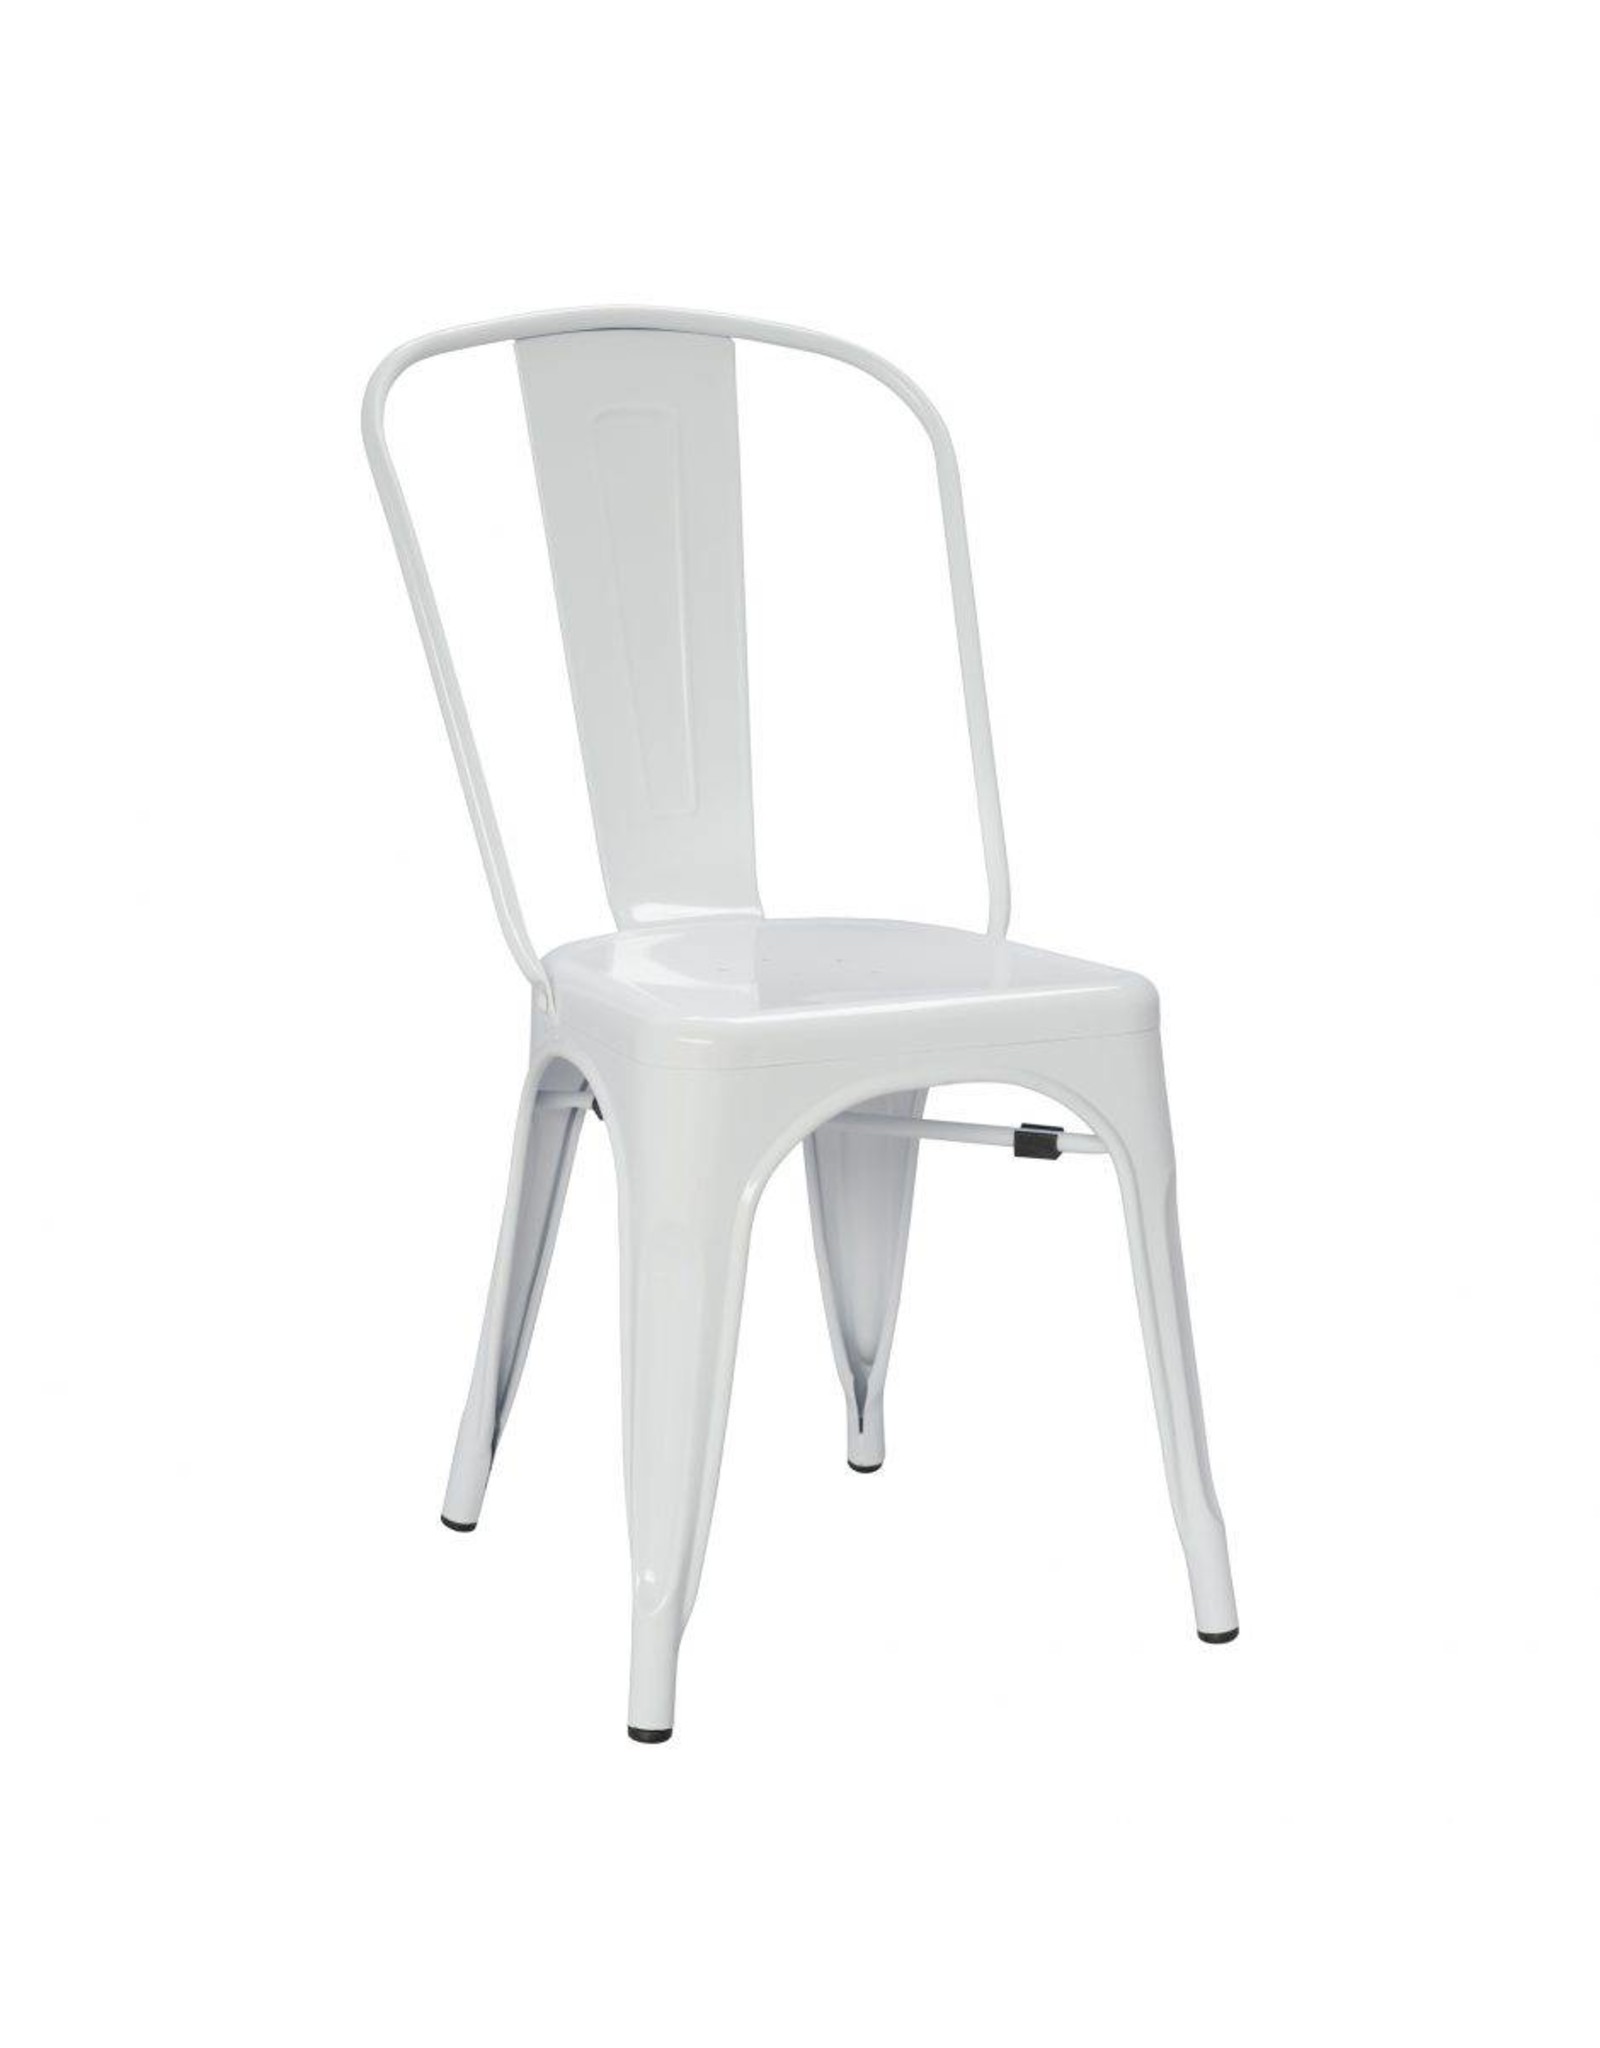 Monroe & Kent TERRENCE DINING CHAIR WHITE